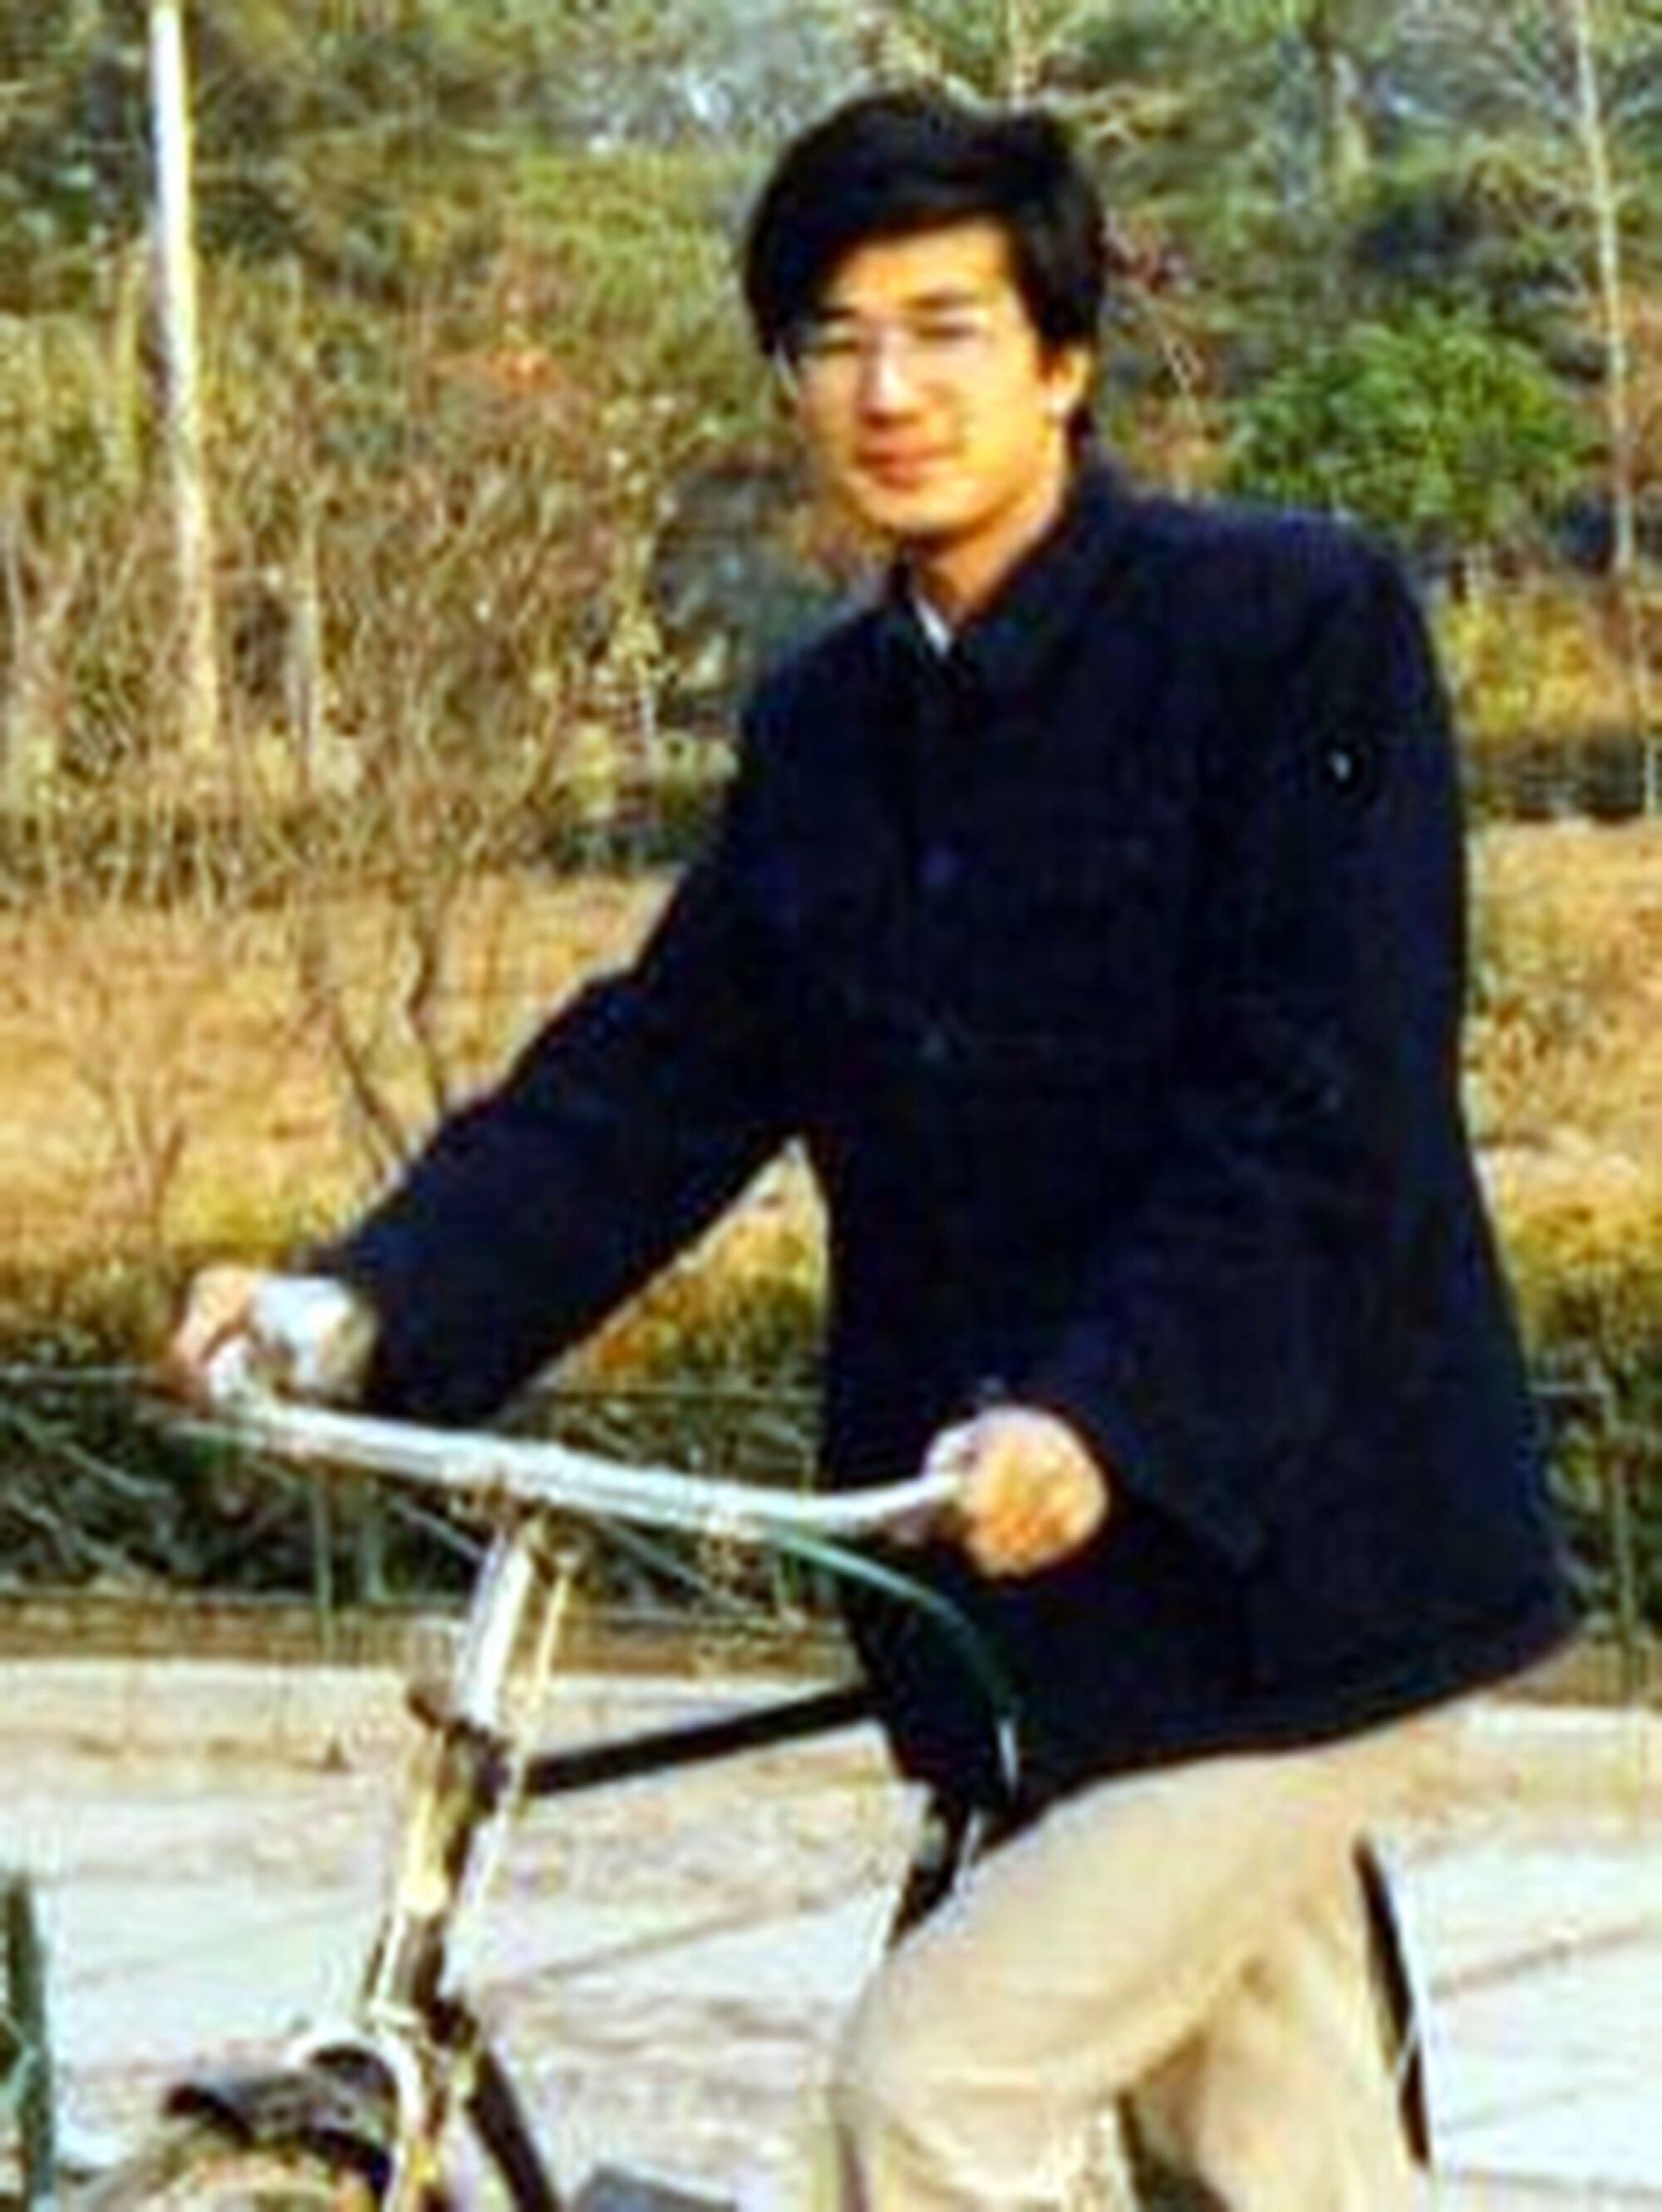 Lu Chunlin, a graduate student, was killed during the Tiananmen Square protests in 1989. 